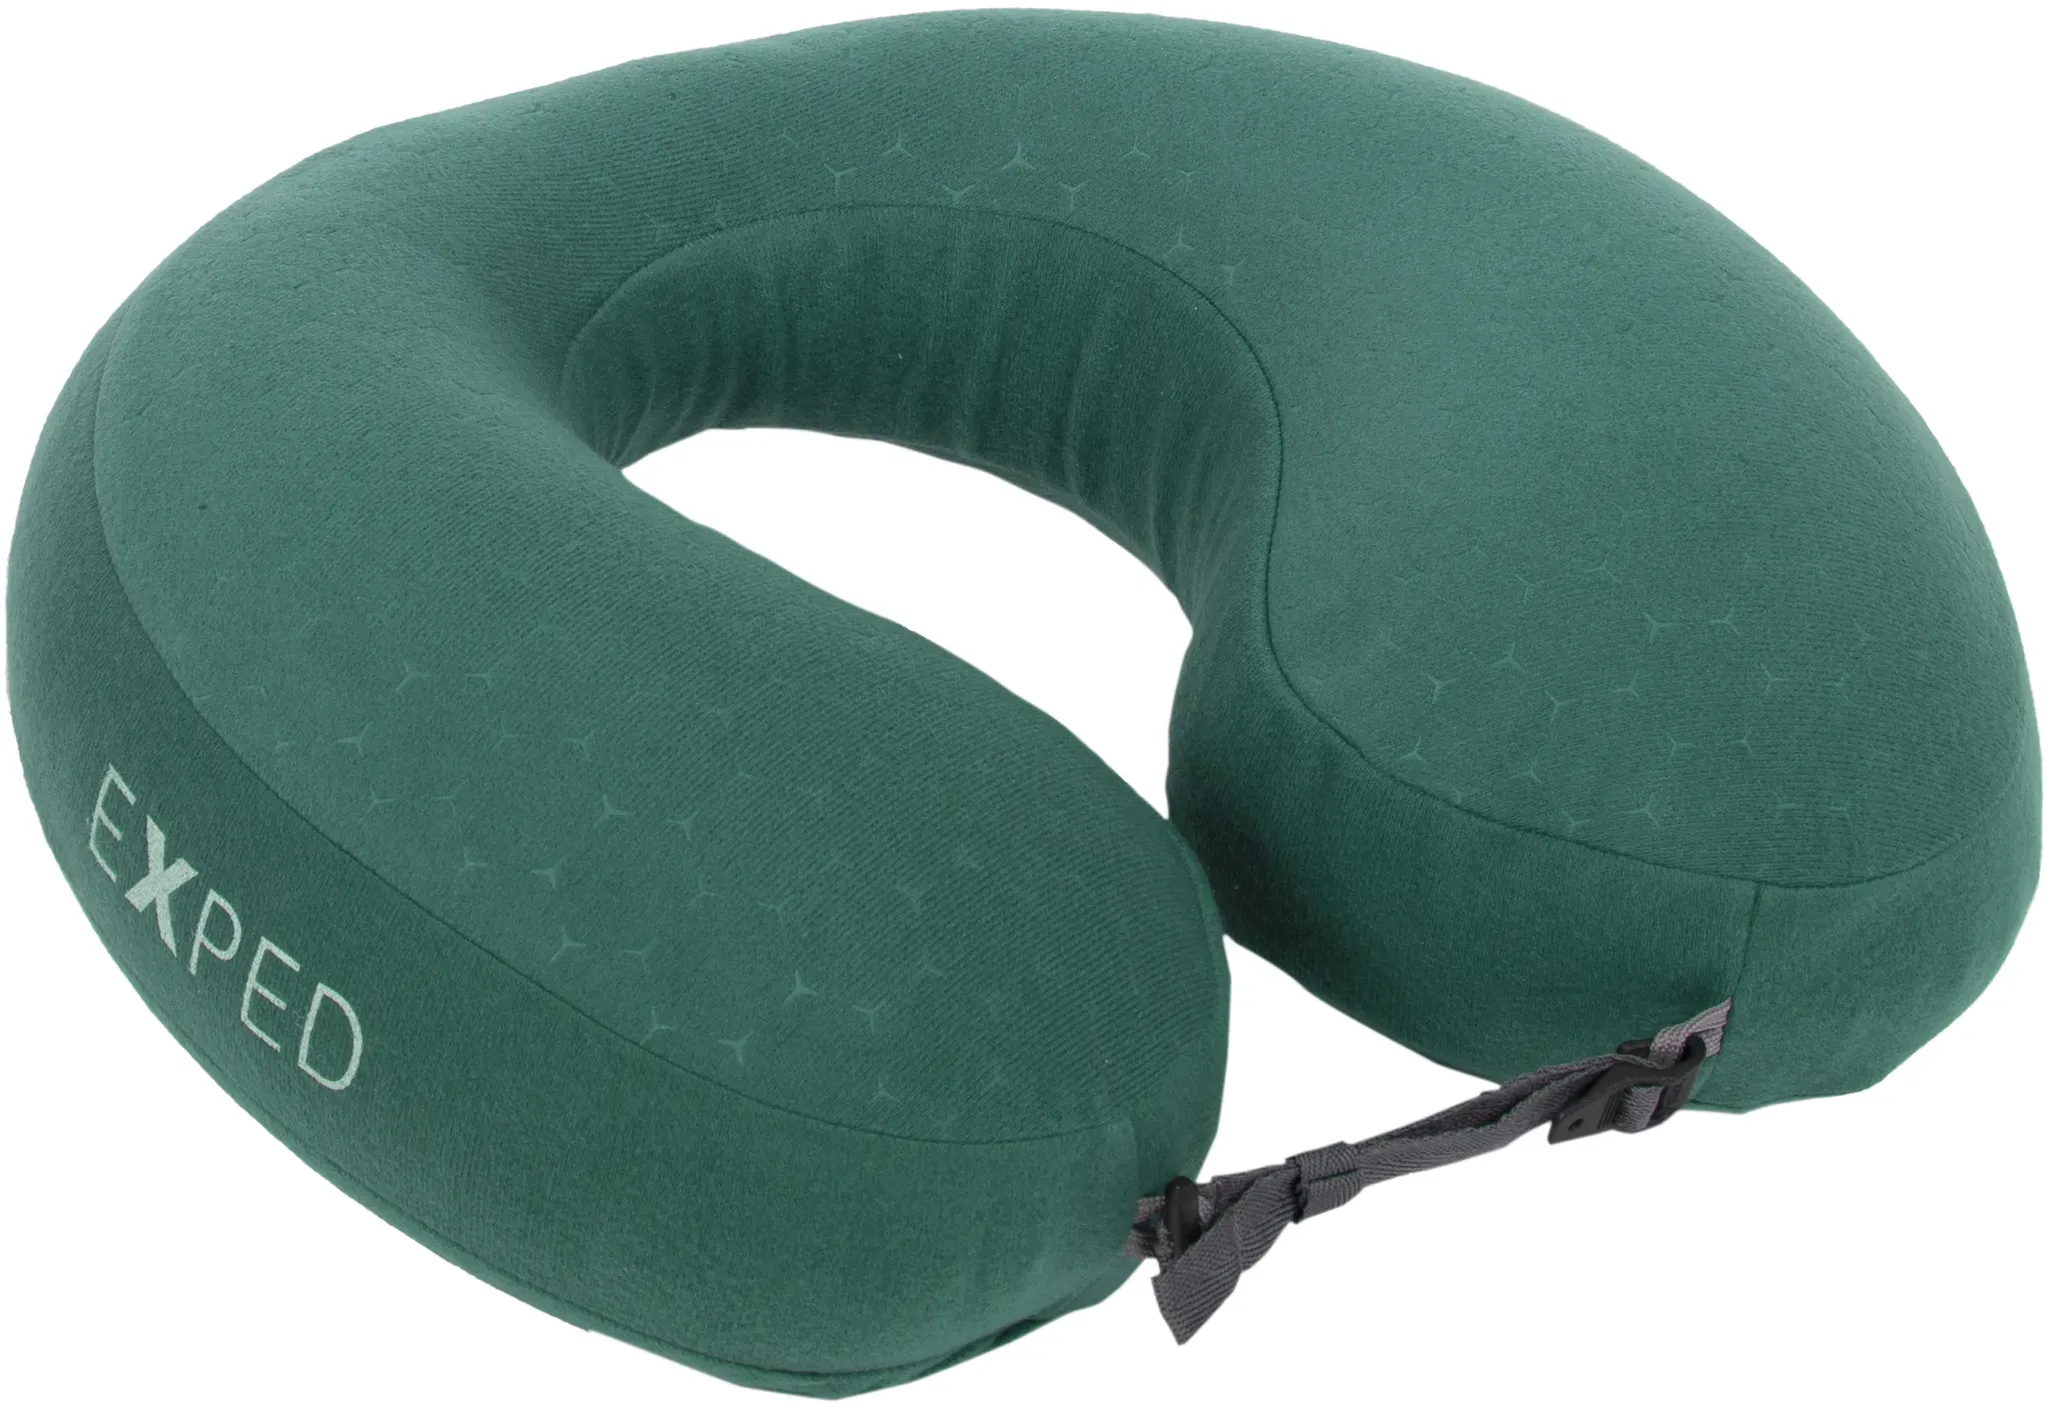 Exped NeckPillow Deluxe - cypress